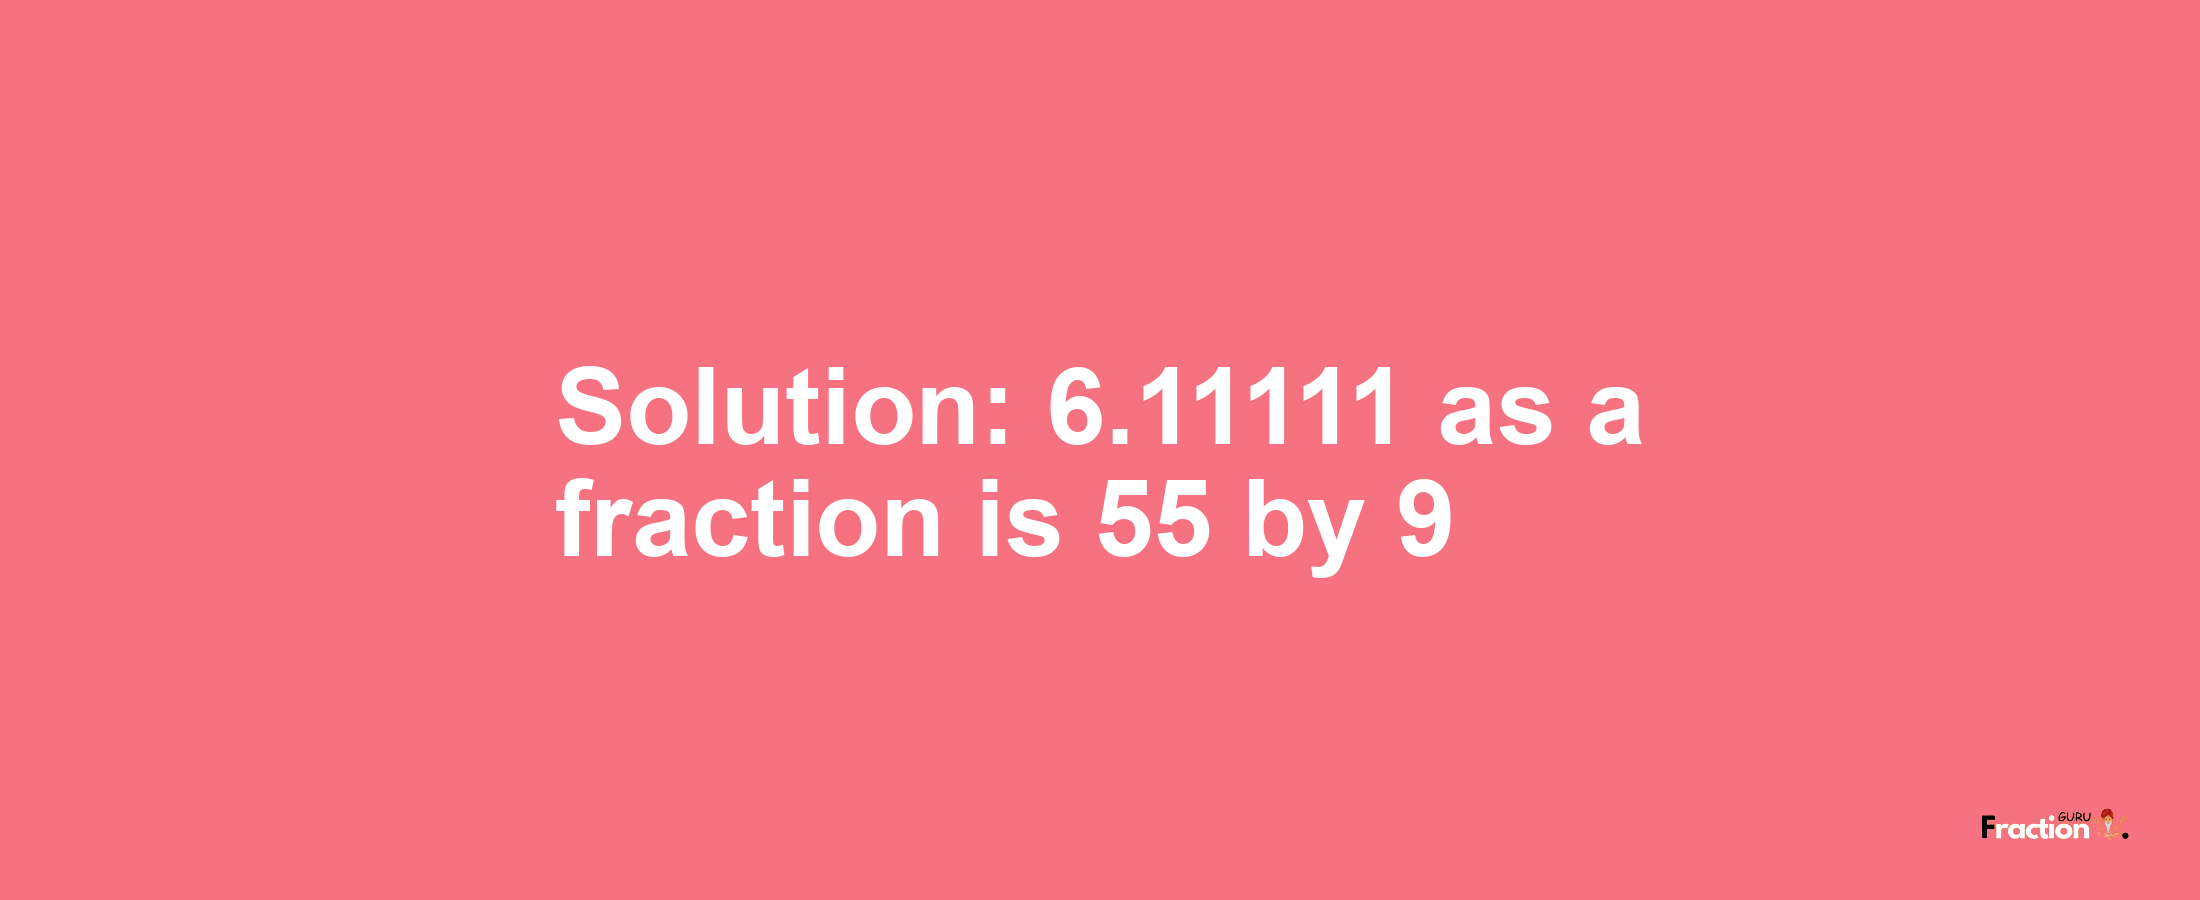 Solution:6.11111 as a fraction is 55/9